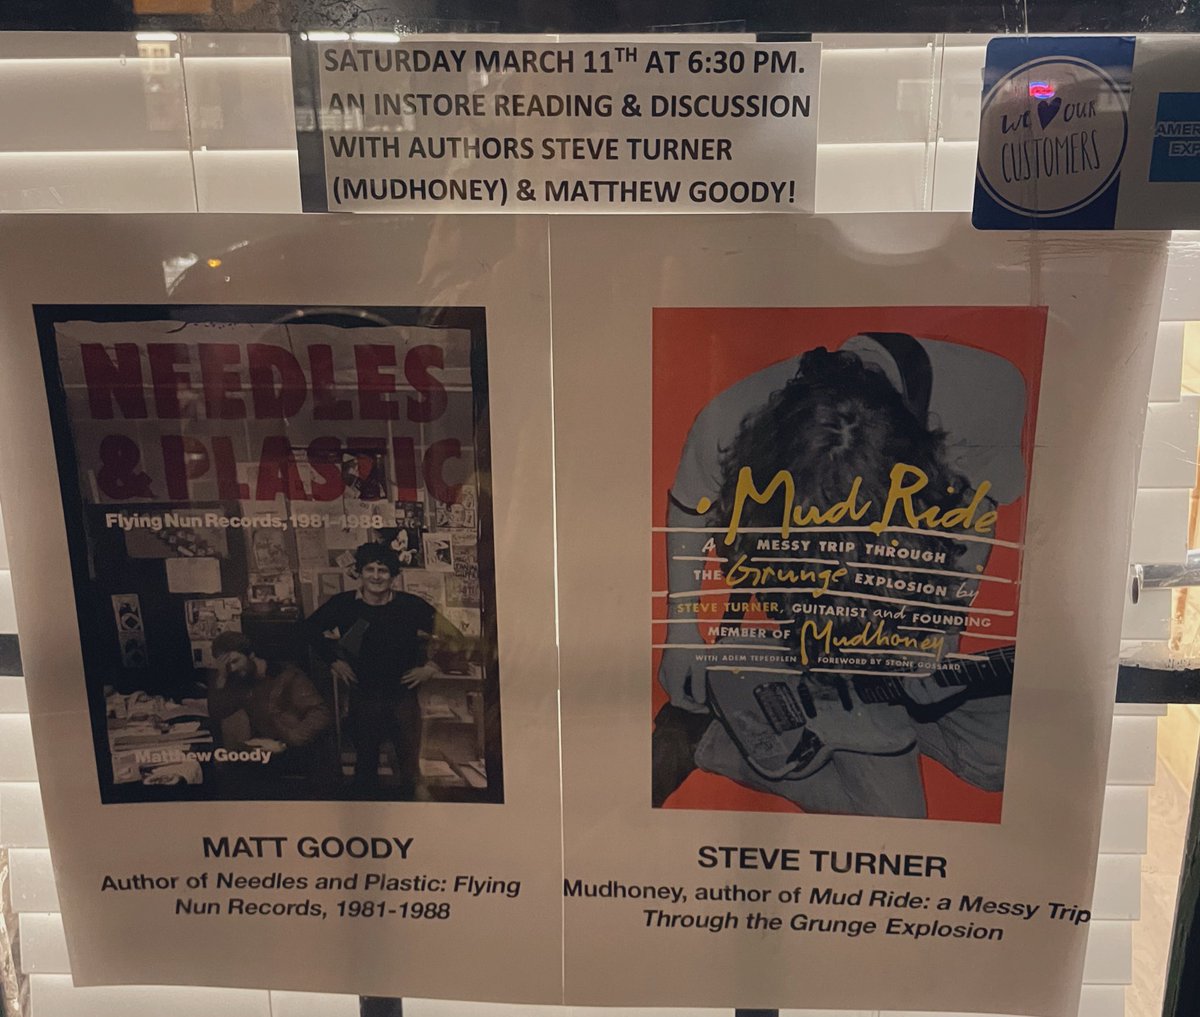 We’re looking forward to our first in-store book talk ever this Saturday! @editaurus moderating Steve Turner & Matt Goody @FlyingNun @ThirdManRRS @awpwriter #awp23